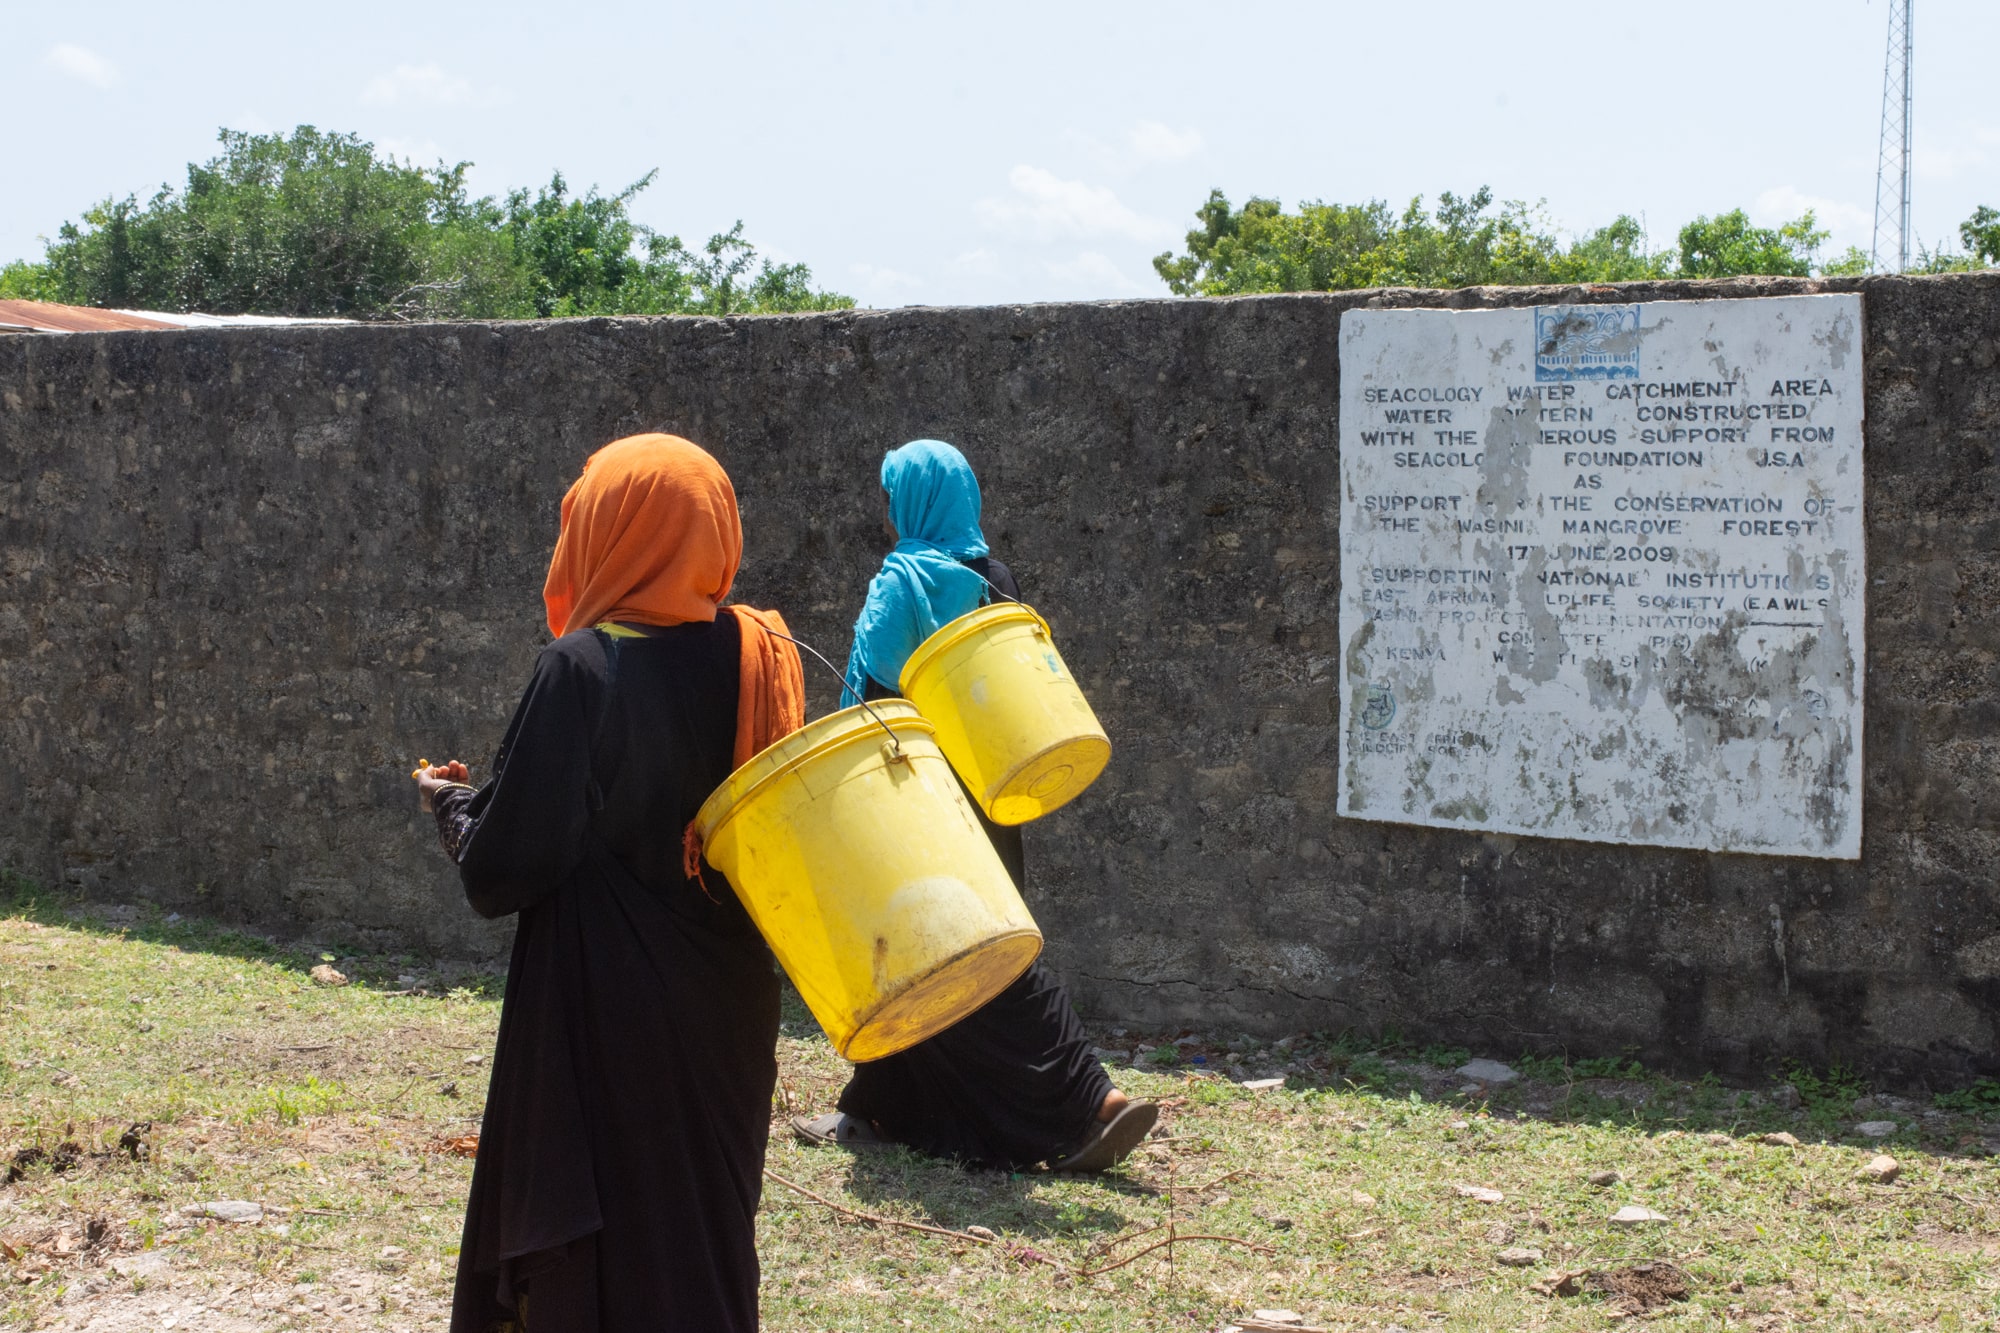 Women on their way to collect water from the cisterns.